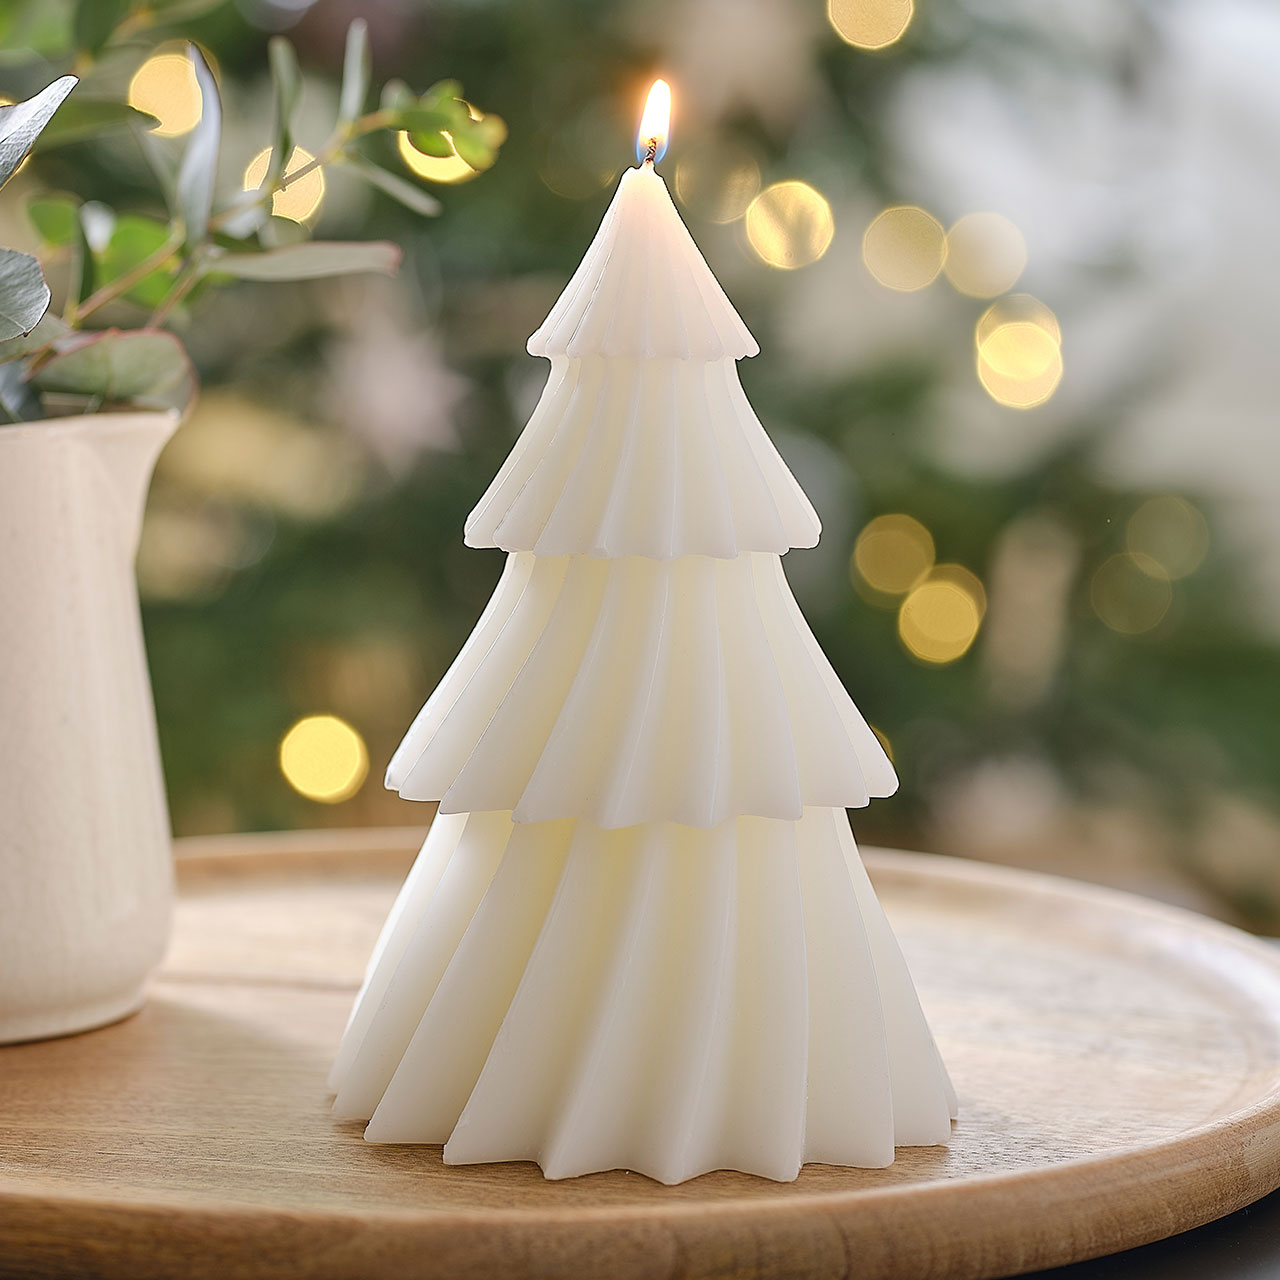 Decorative Candle - White Fir Tree